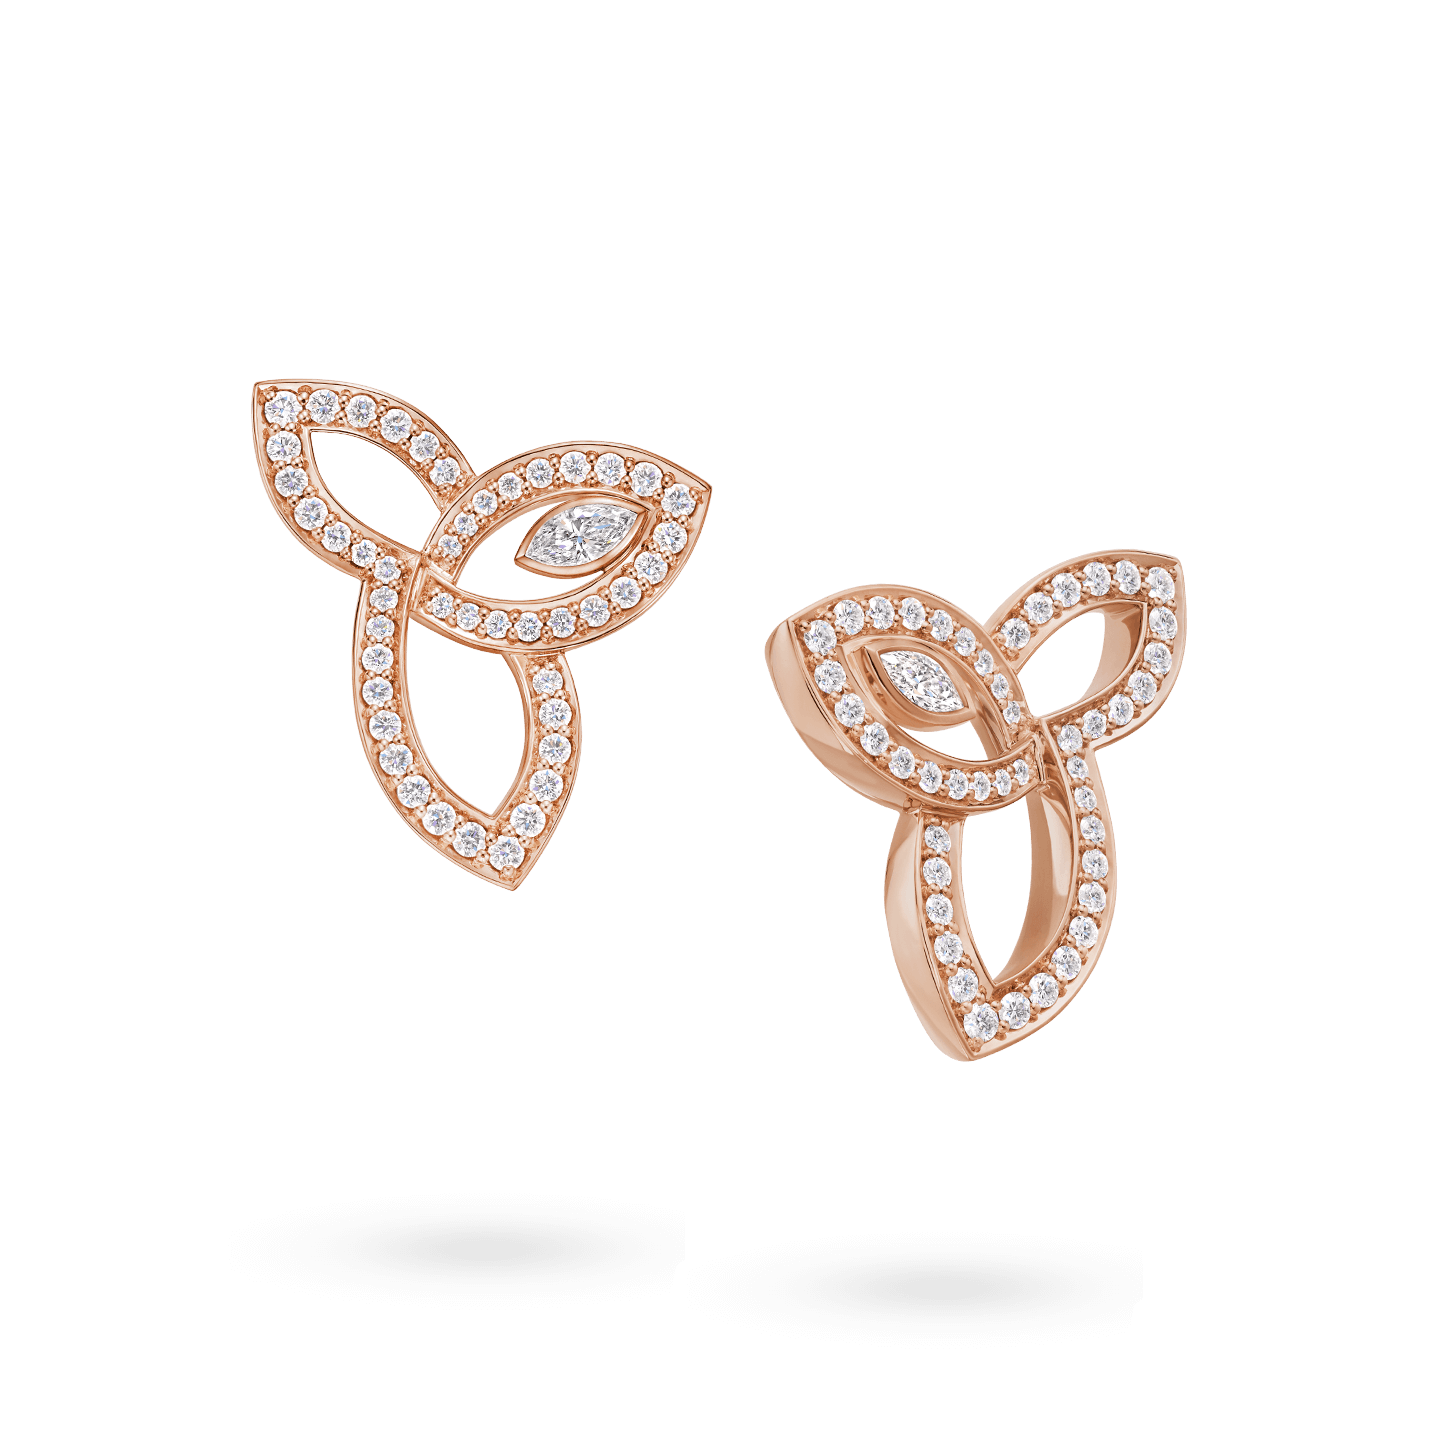 Lily Cluster Diamond Earrings in Rose Gold, Product Image 2